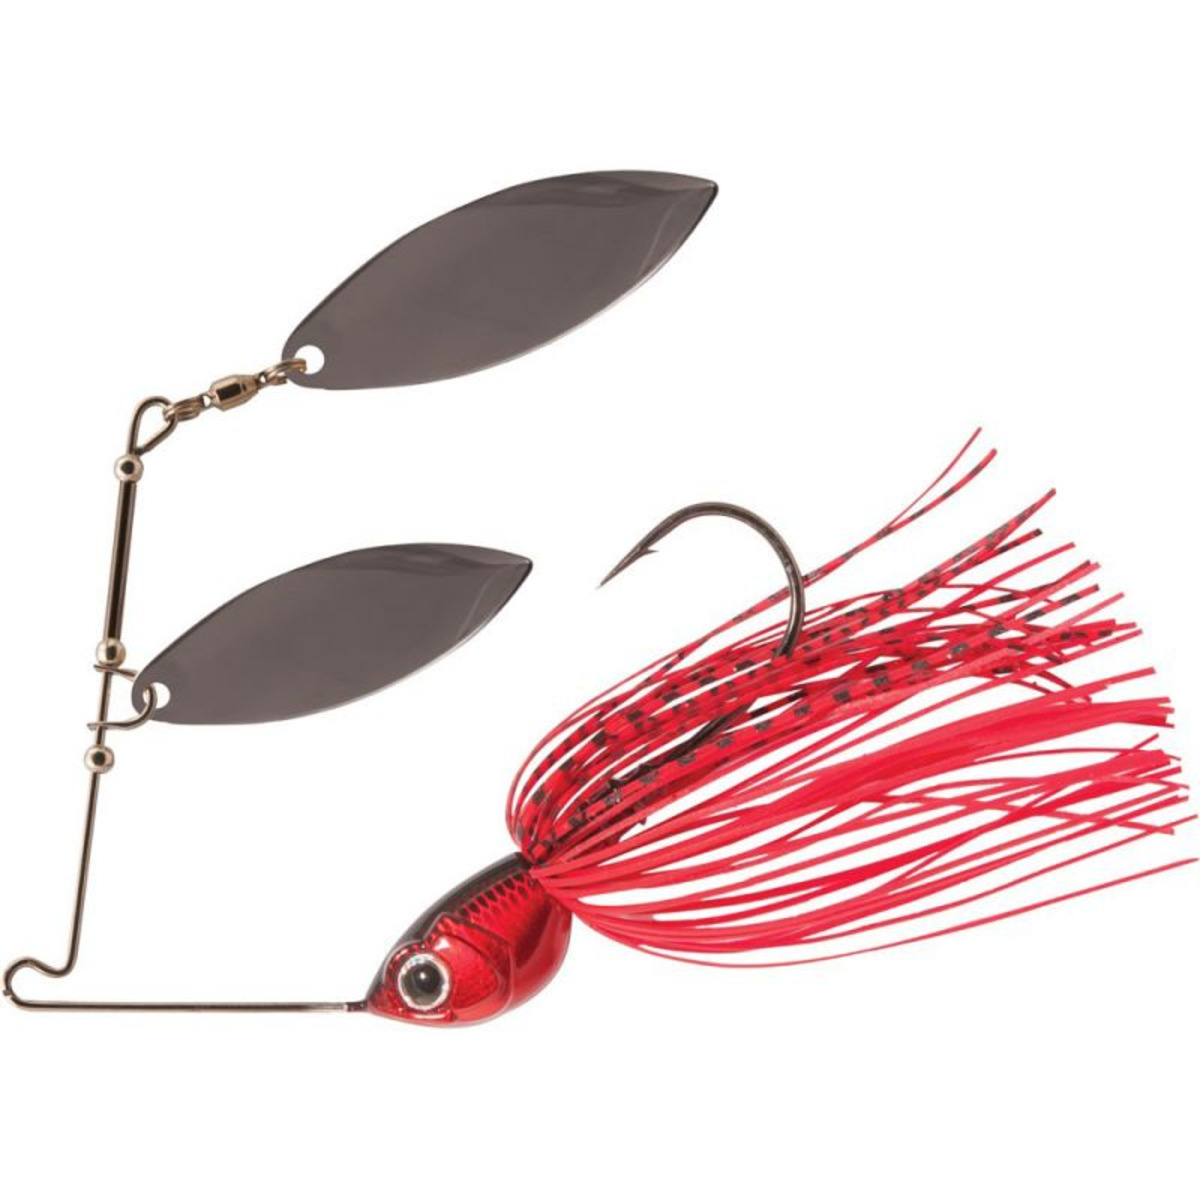 Rapture Sharp Spin Double Willow - 14.0 g - Red Hot